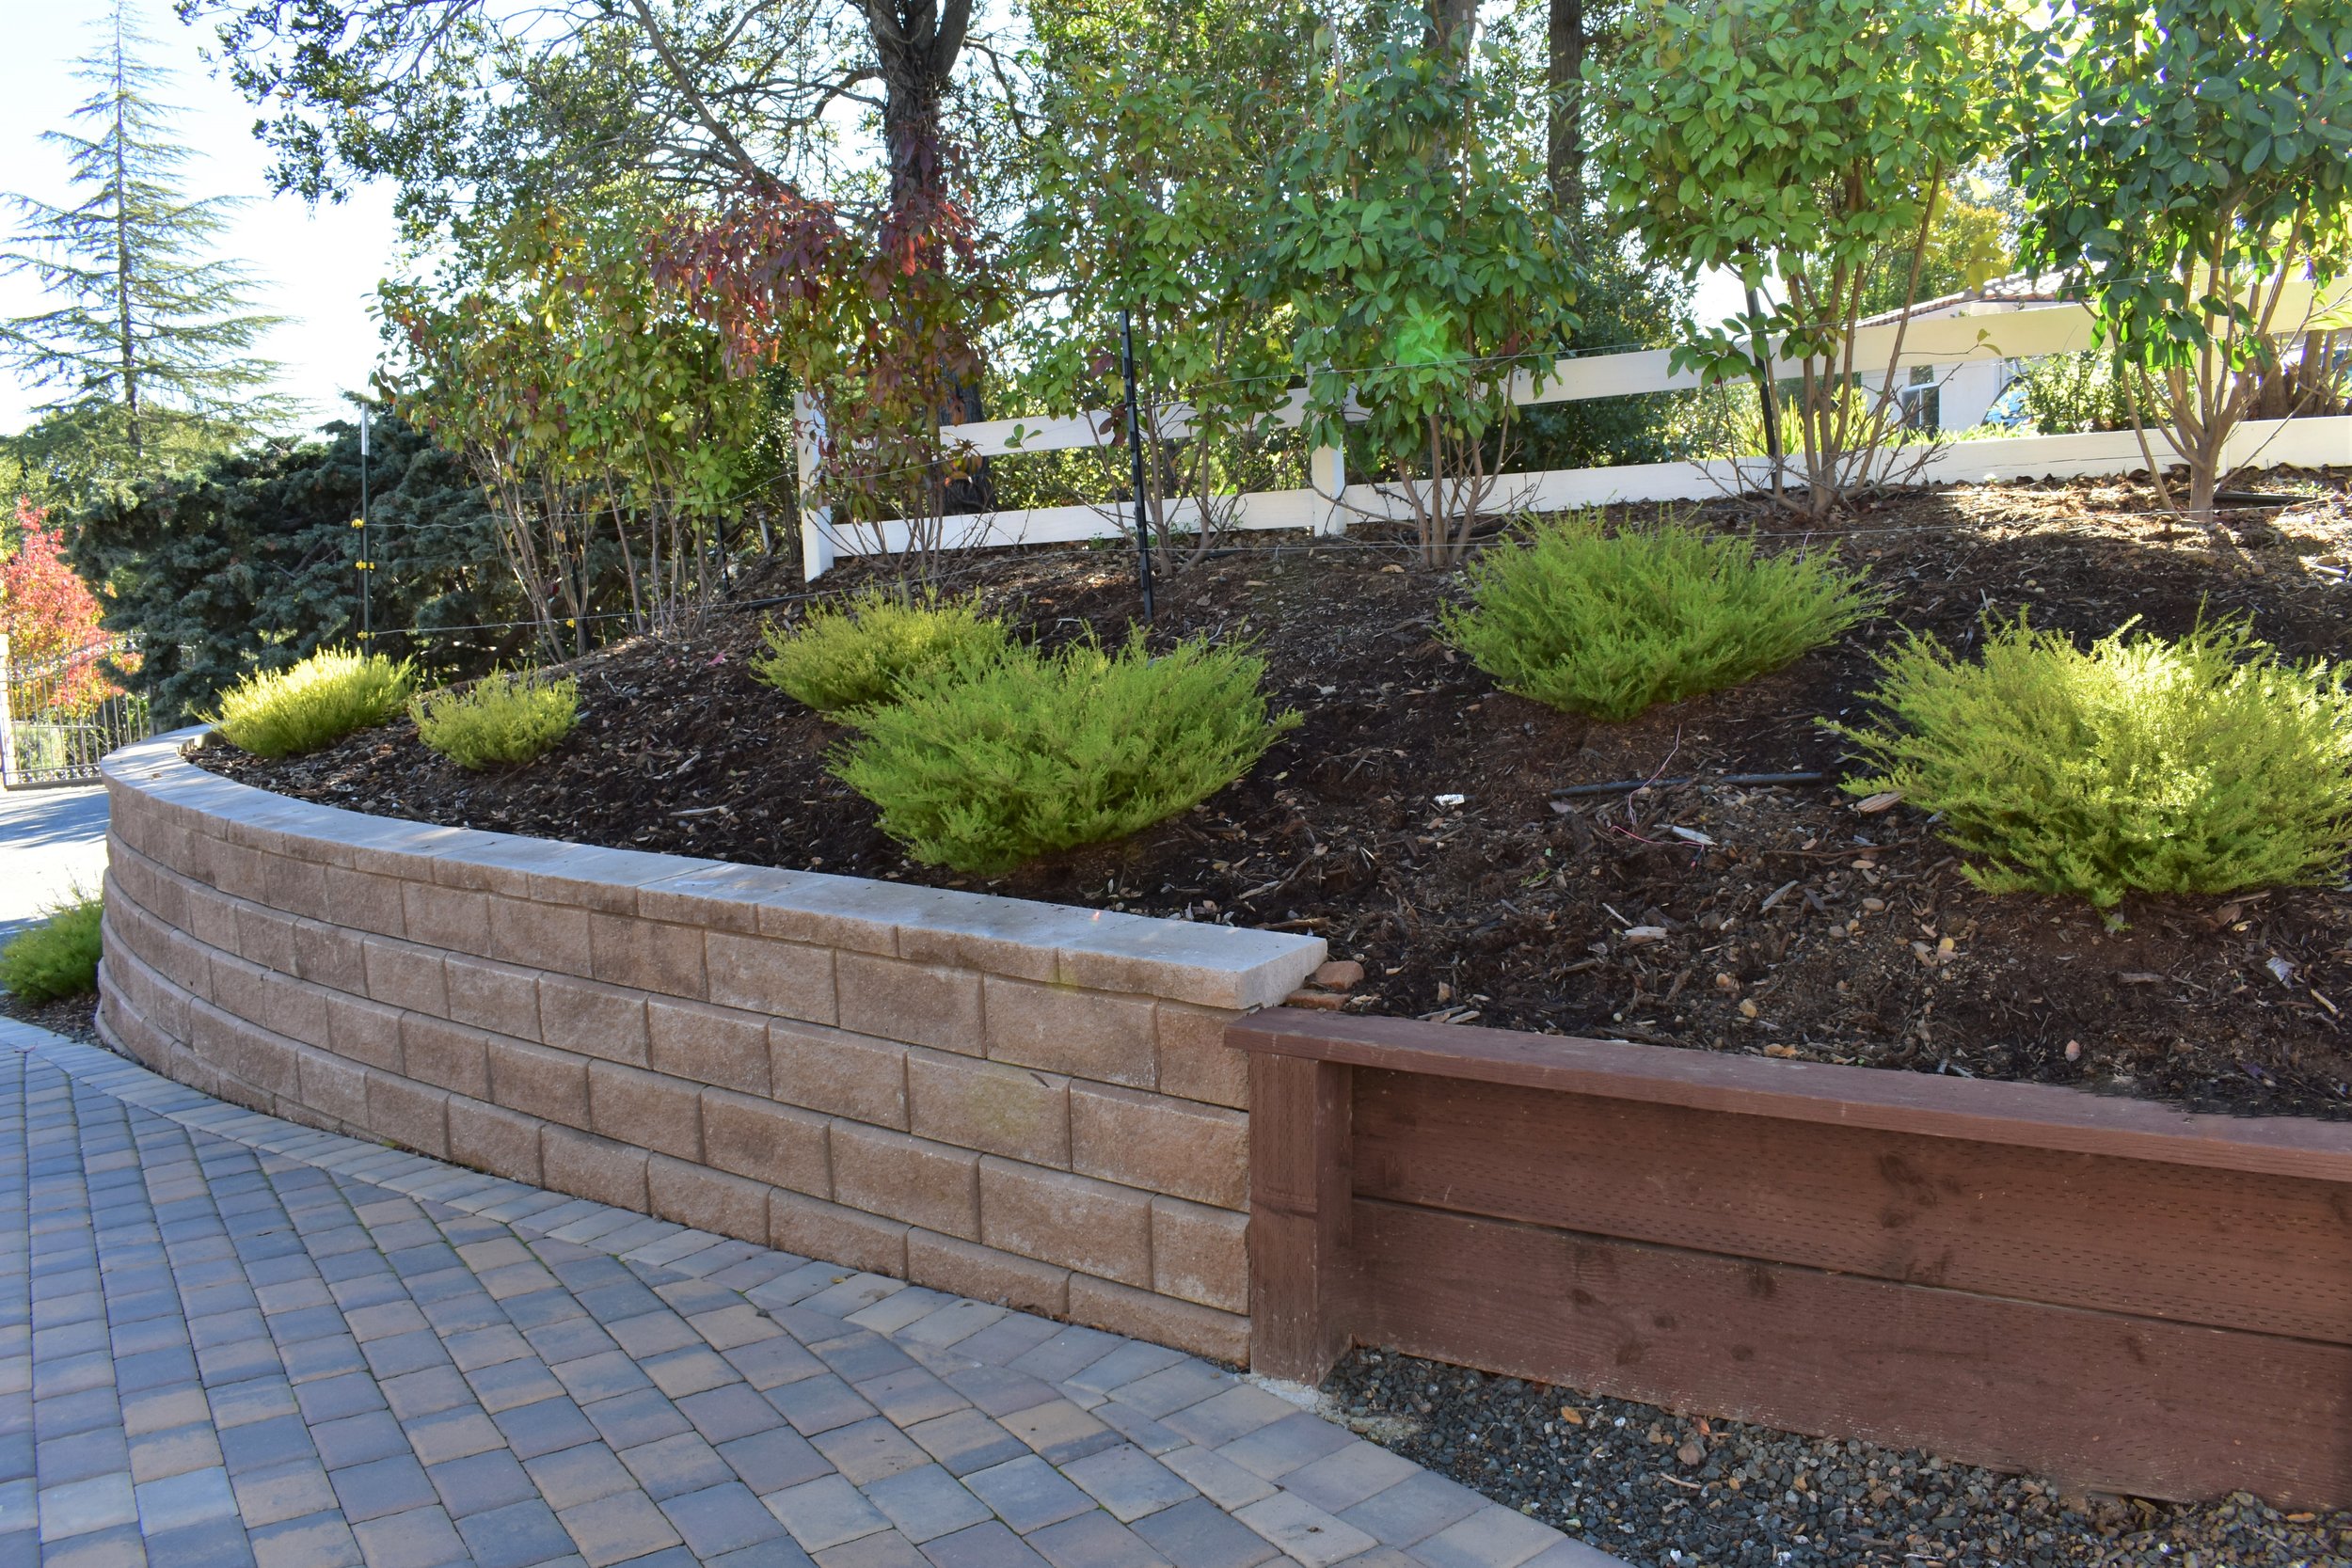  Block/ wood retaining wall combo, along with all new plants. 